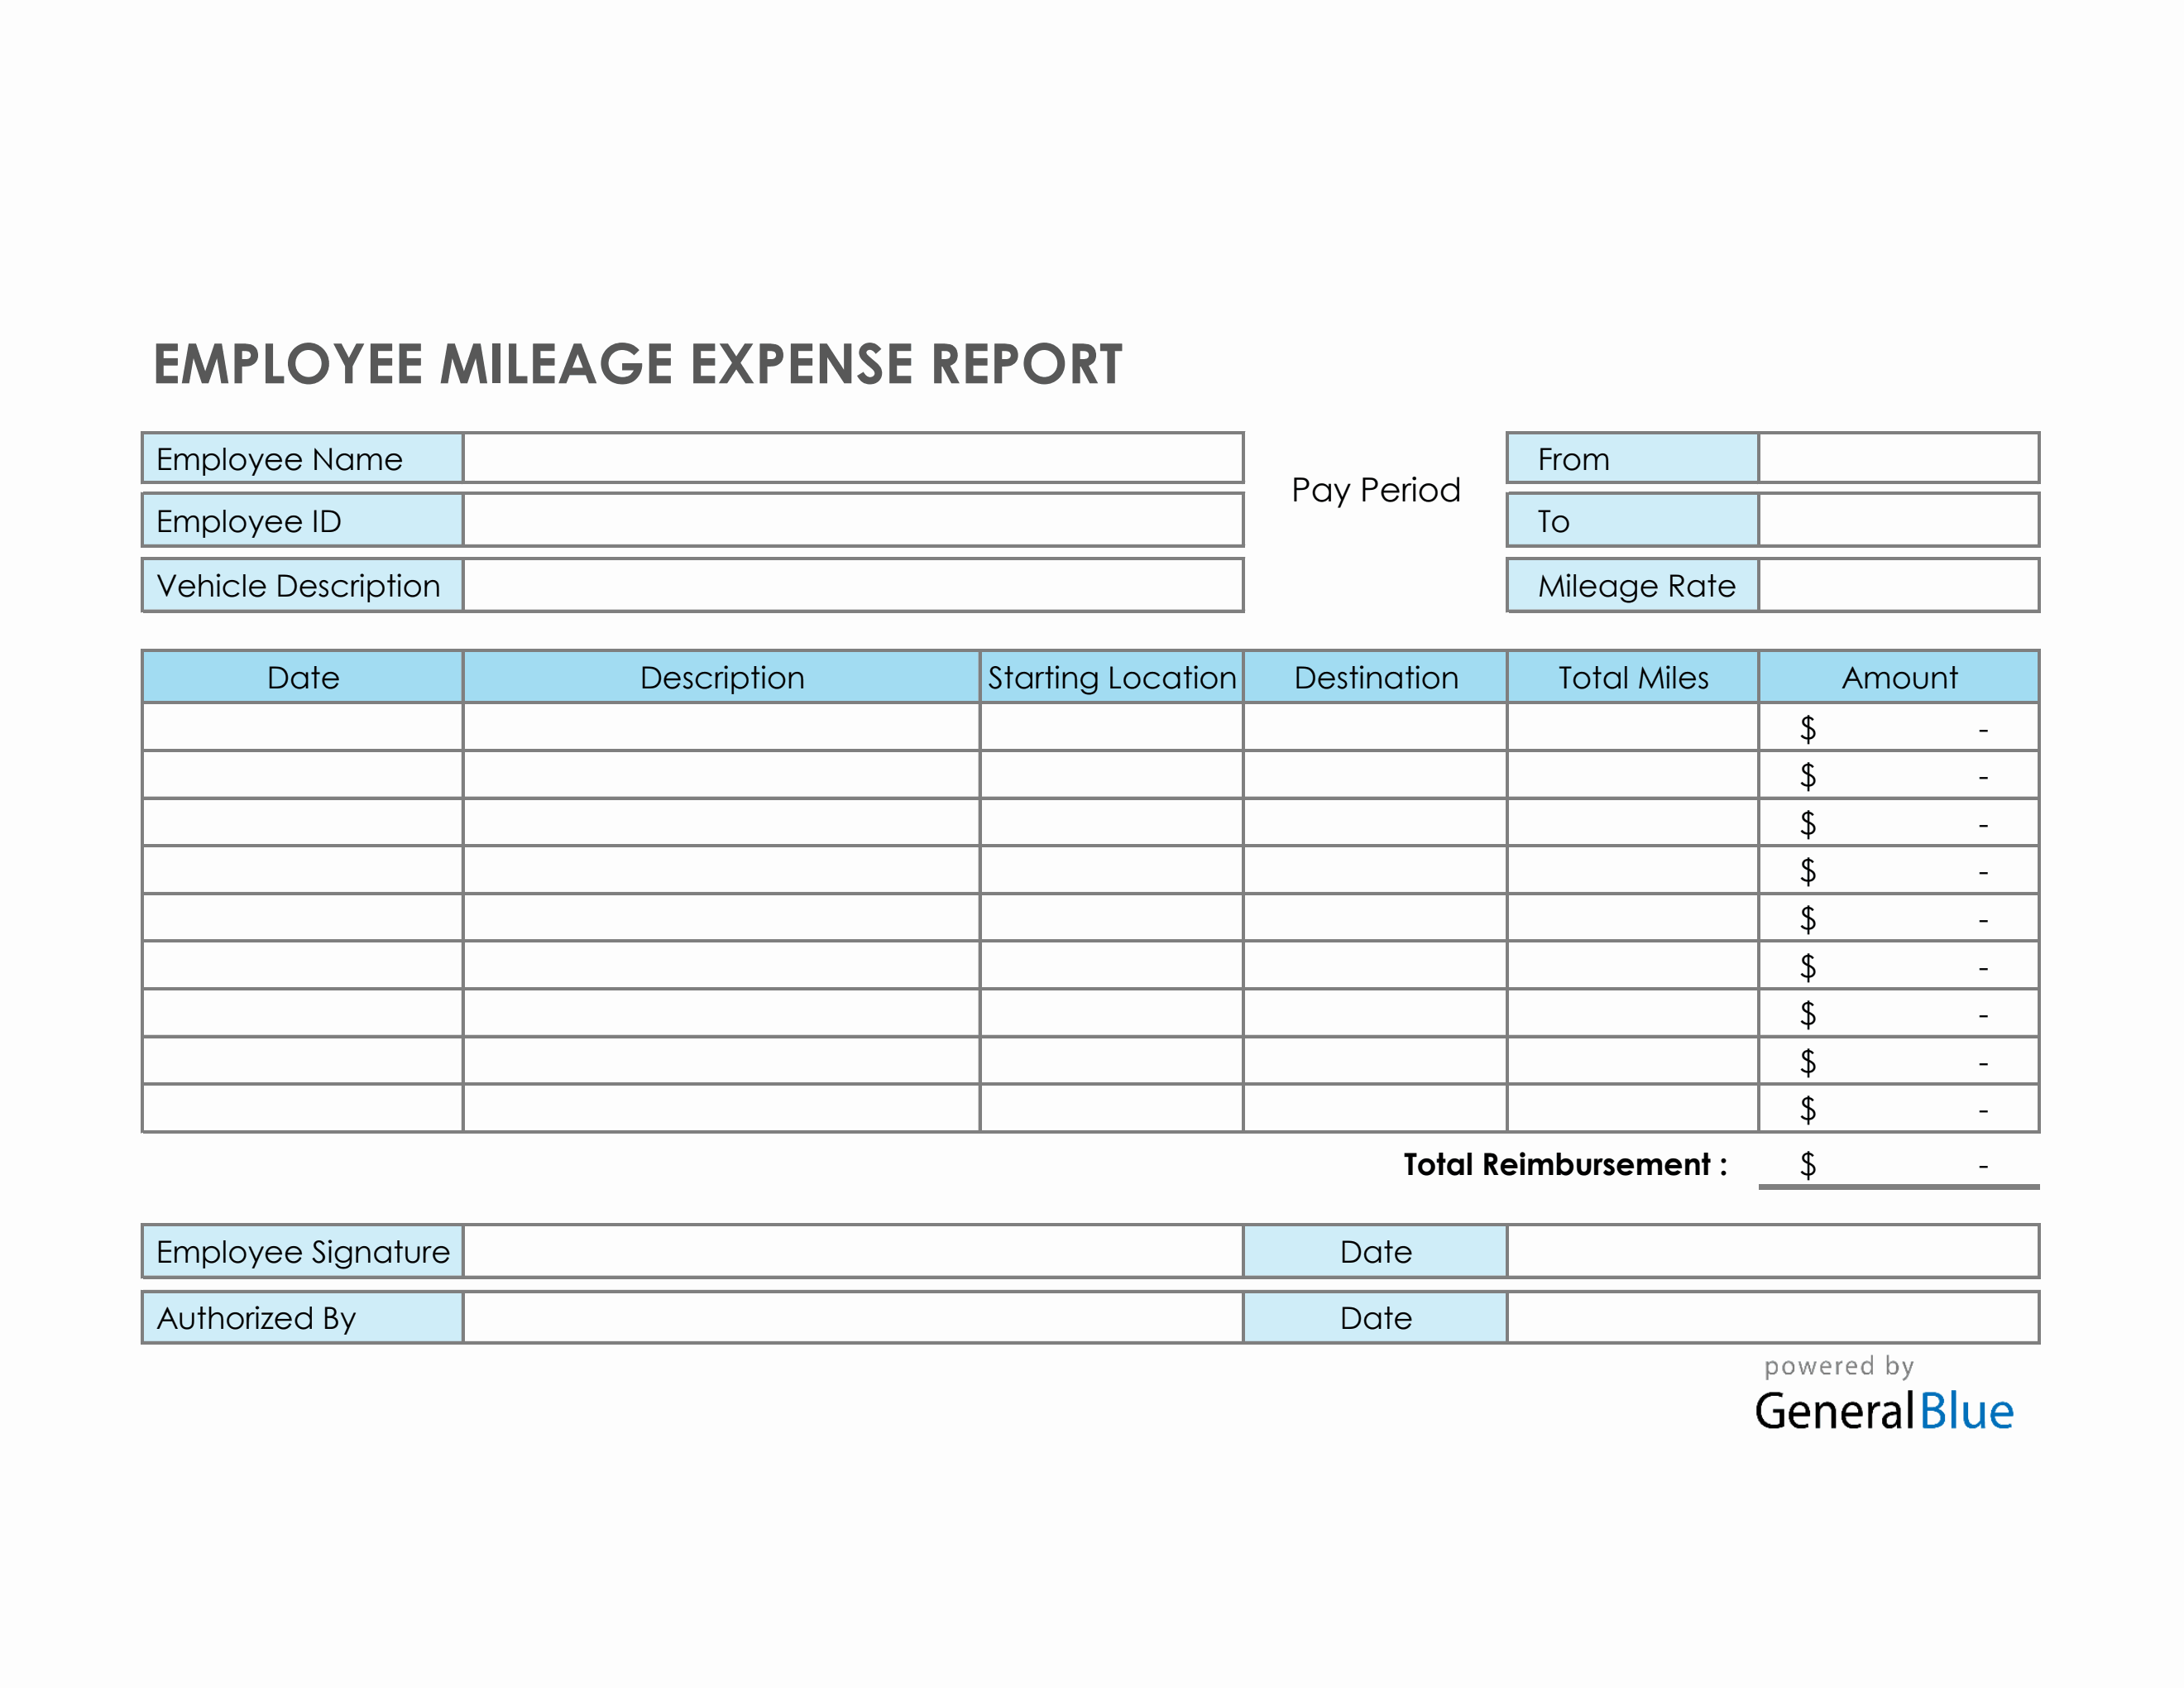 Employee Mileage Expense Report Template in Excel In Mileage Report Template